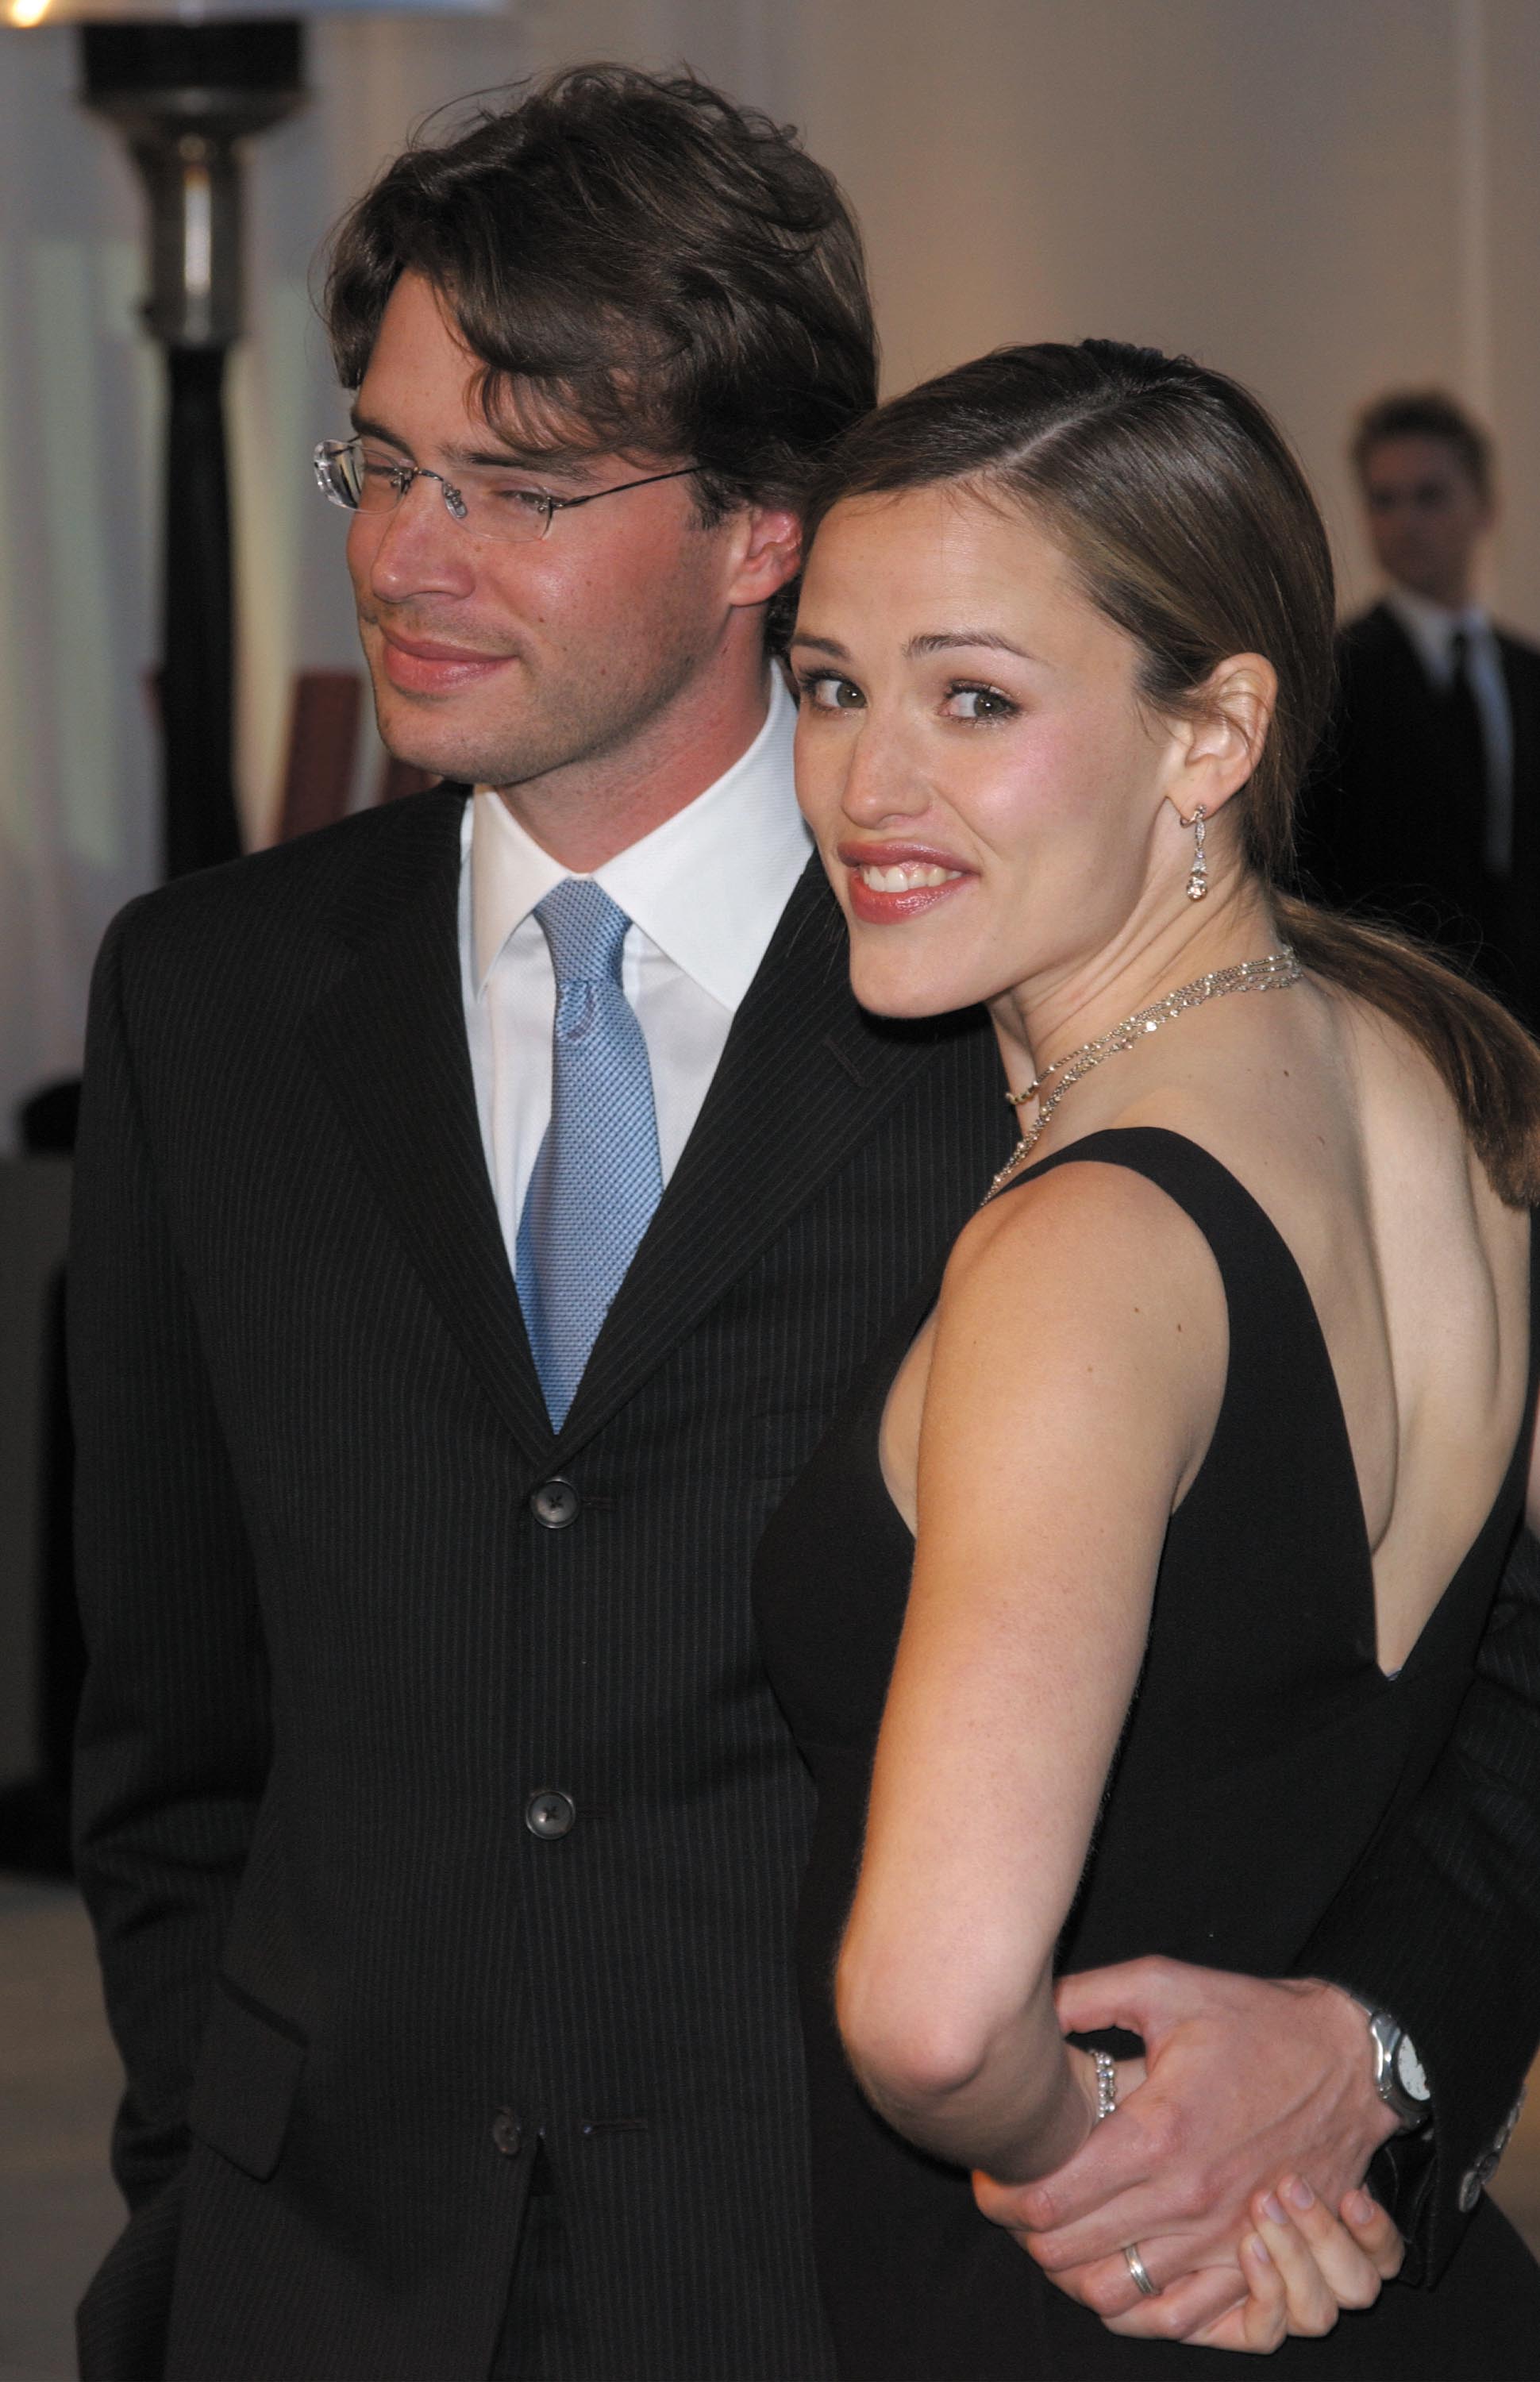 Scott Foley and Jennifer Garner at the Vanity Fair Oscar party at Mortons on March 24, 2002 in West Hollywood, California. | Source: Getty Images